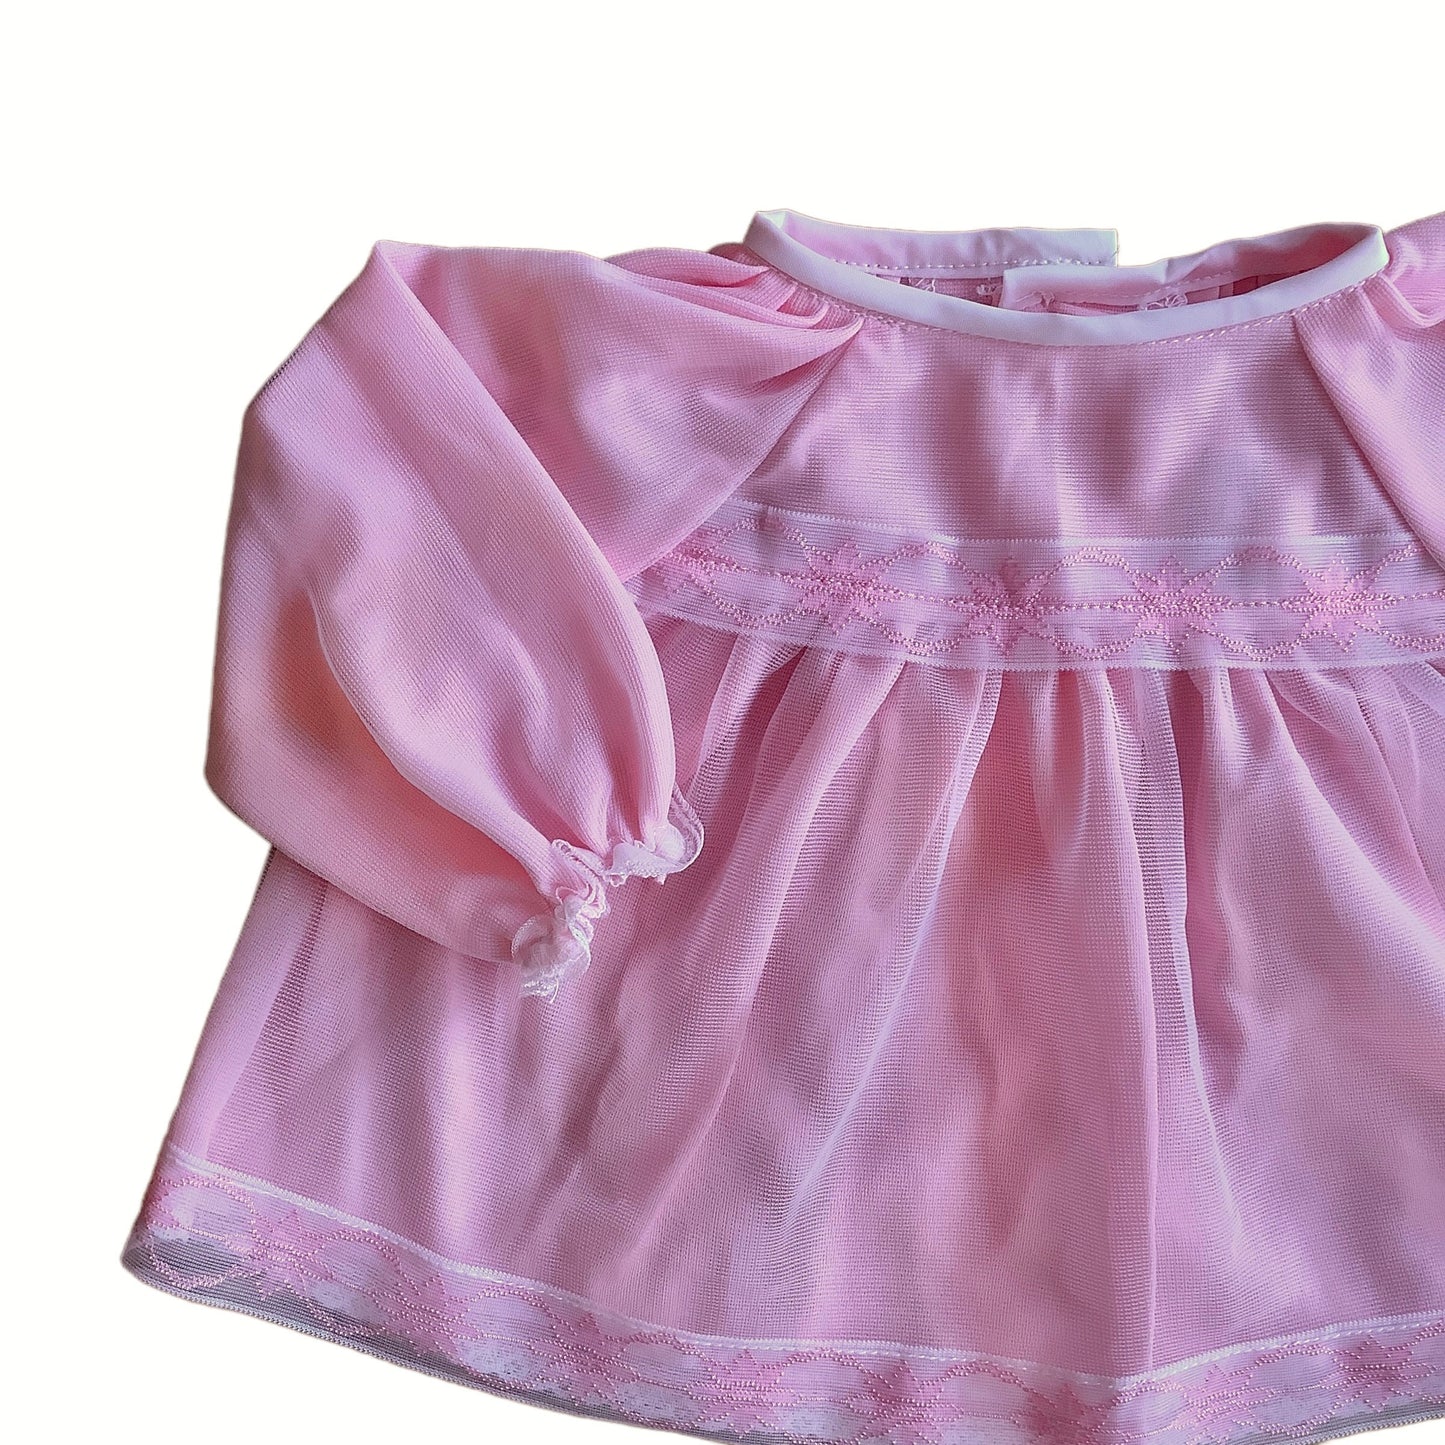 Vintage 60's Pink Shirt/ Top / Blouse / 0-3 Months